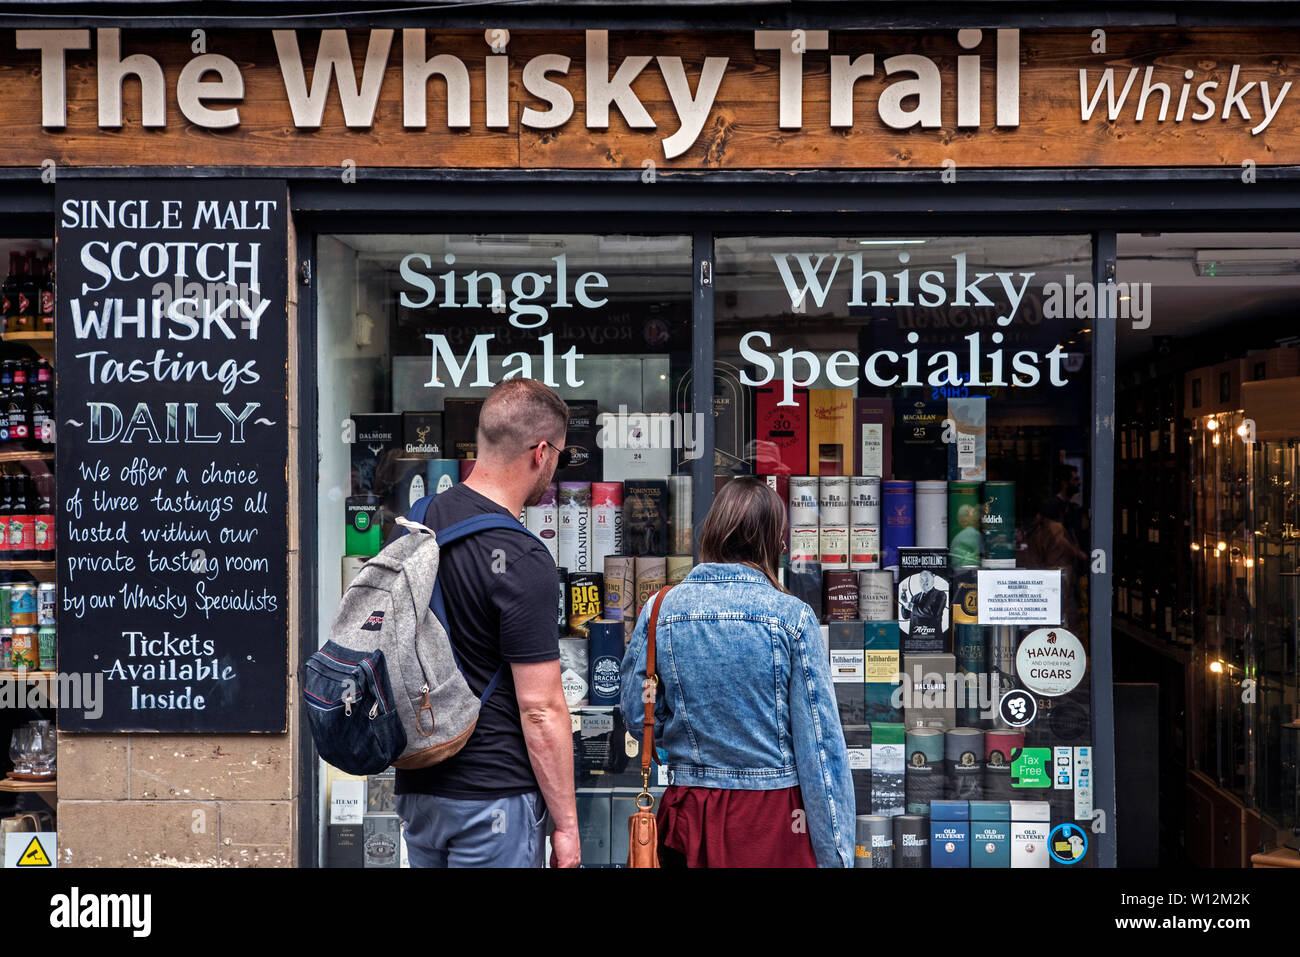 A young couple look into the window of The Whisky Trail shop on the High Street, Edinburgh, Scotland, UK. Stock Photo